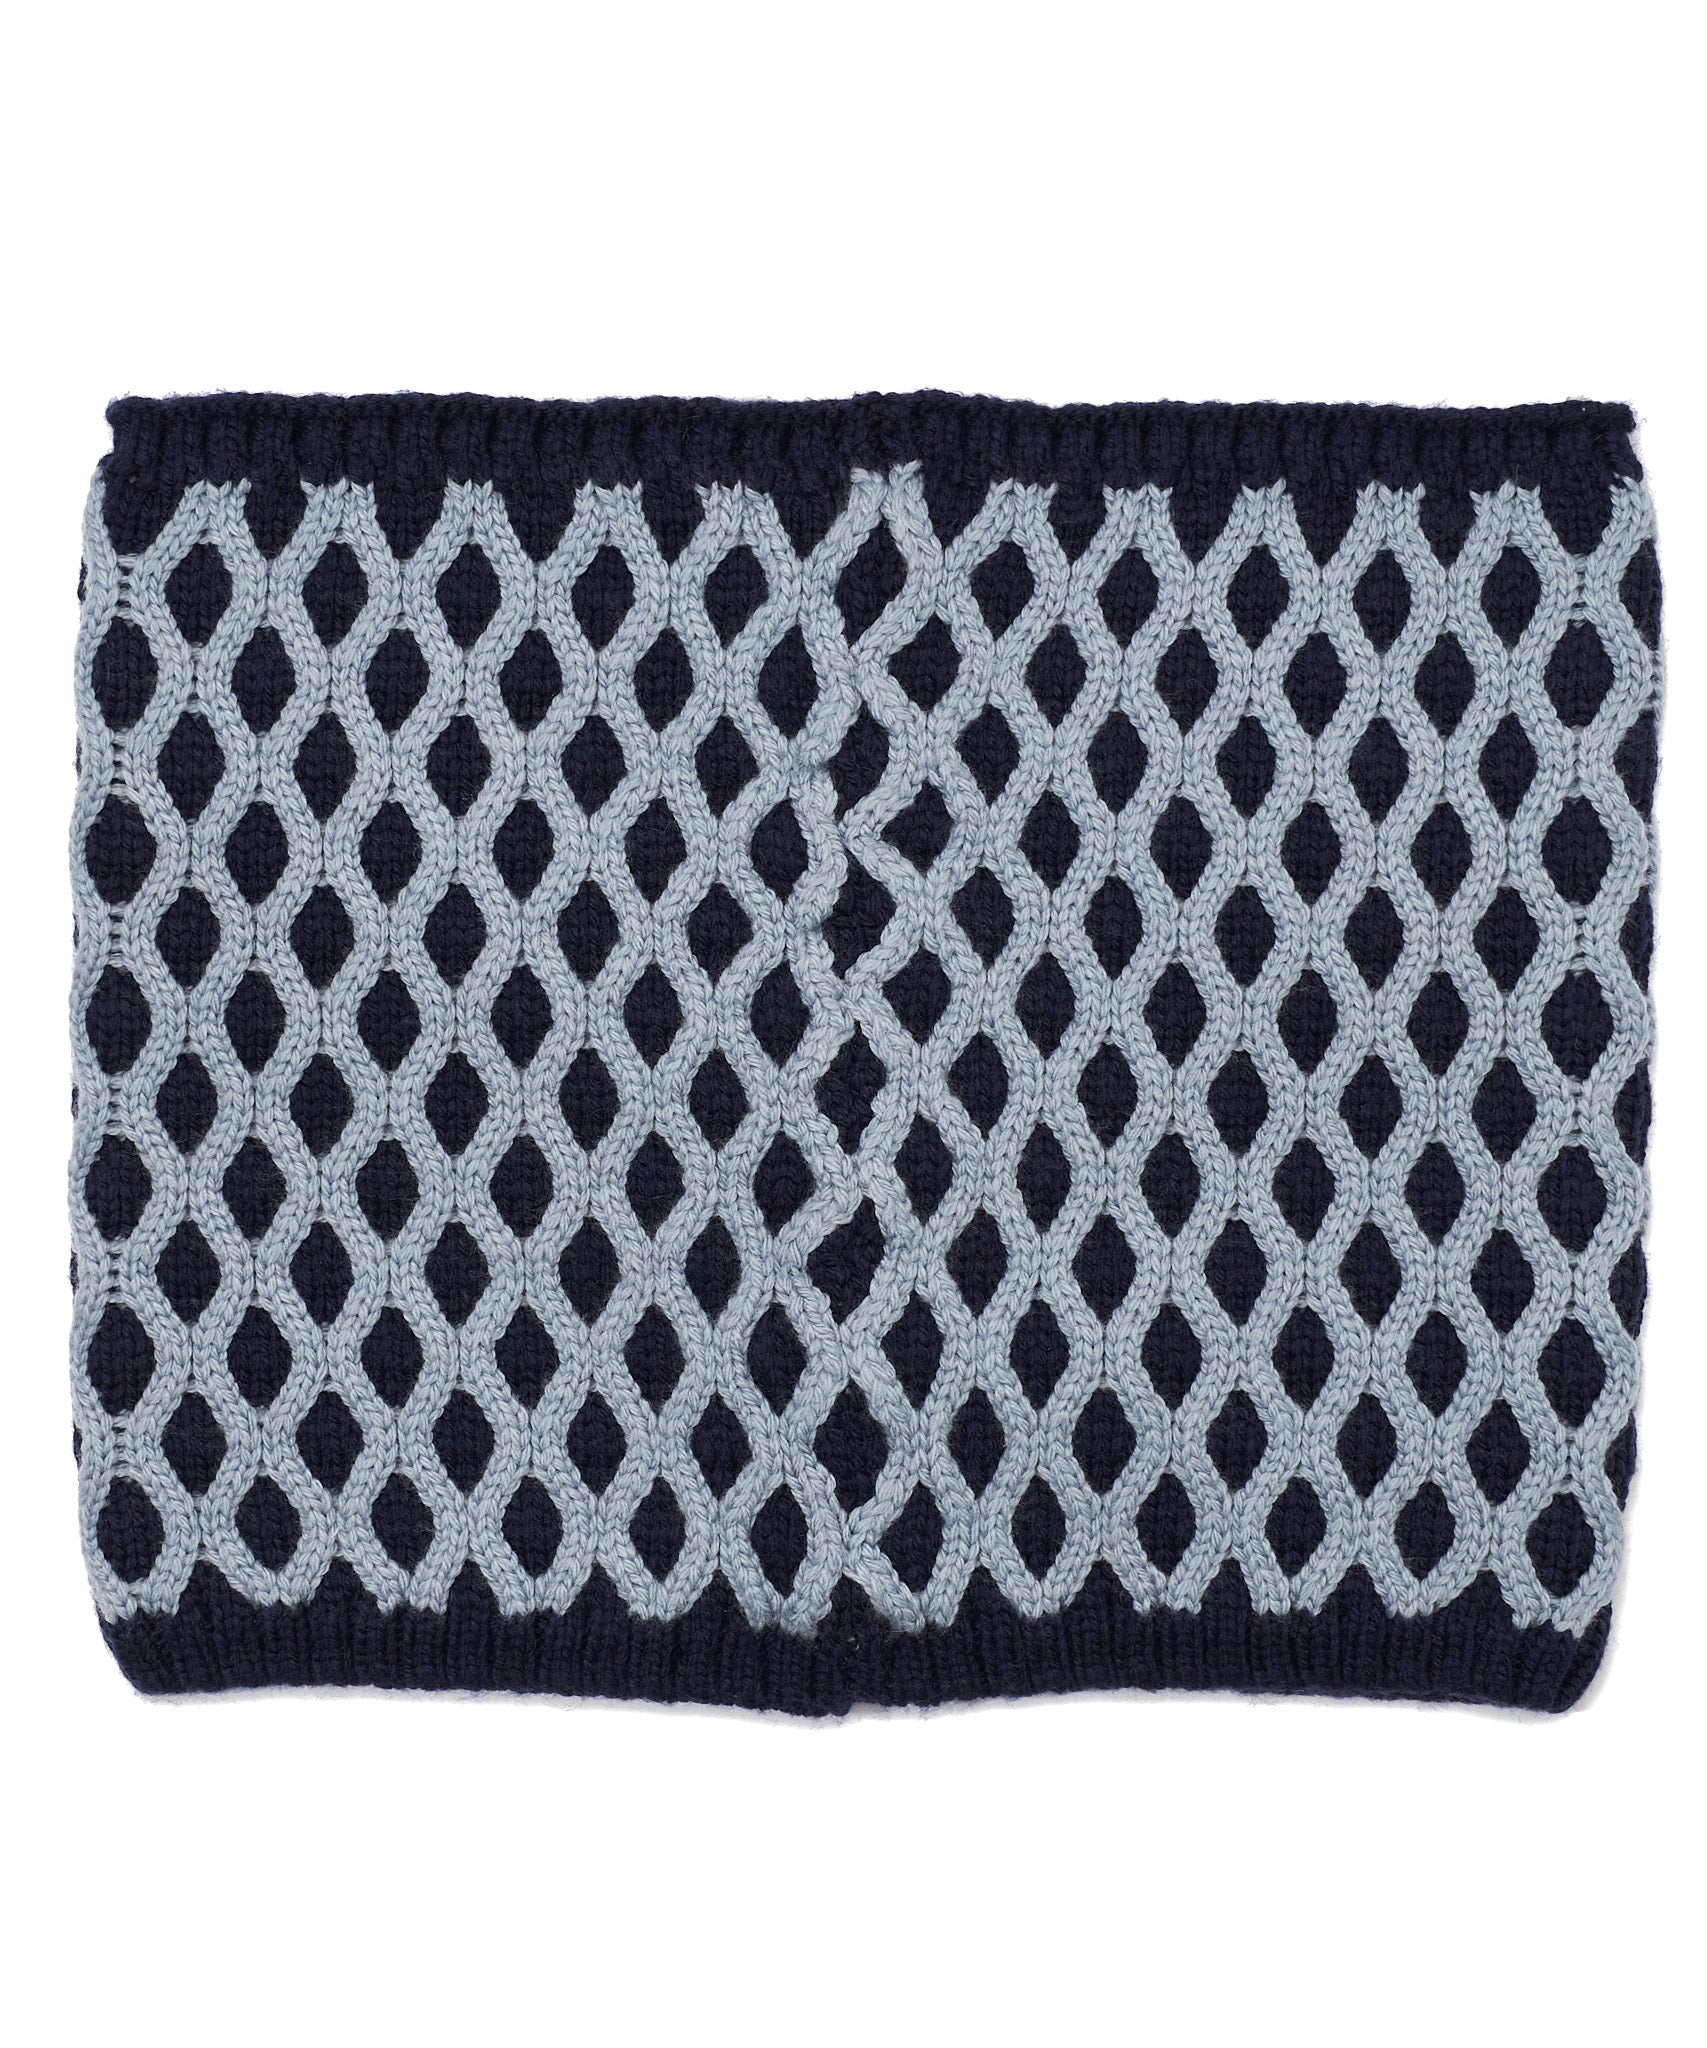 Recycled Bi-color Honeycomb Neck Warmer in color Navy